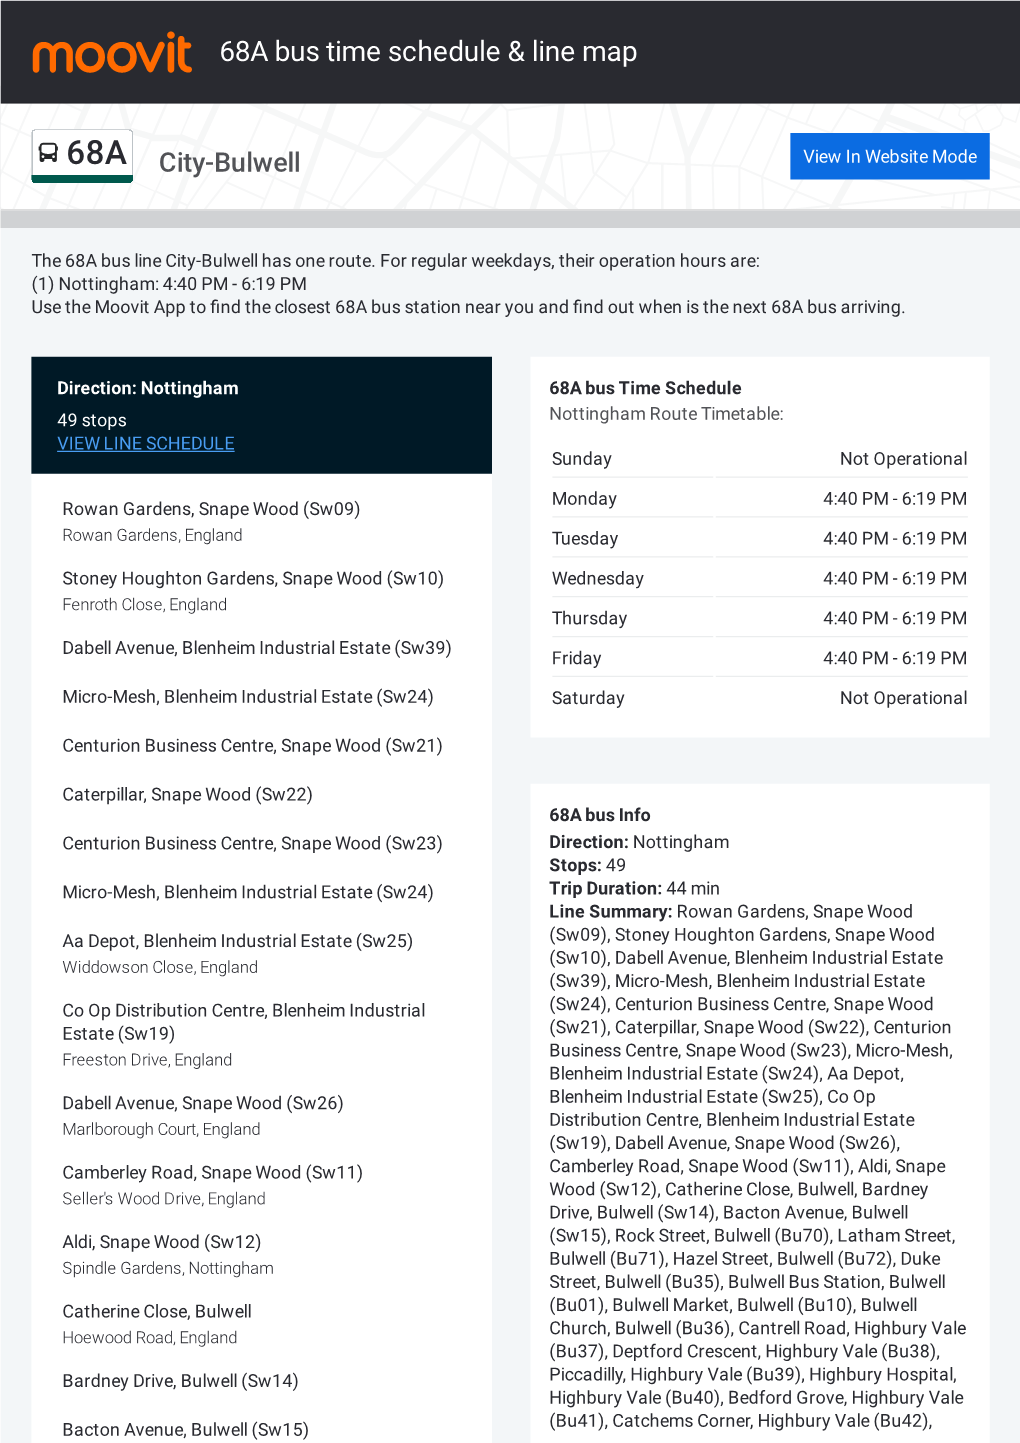 68A Bus Time Schedule & Line Route